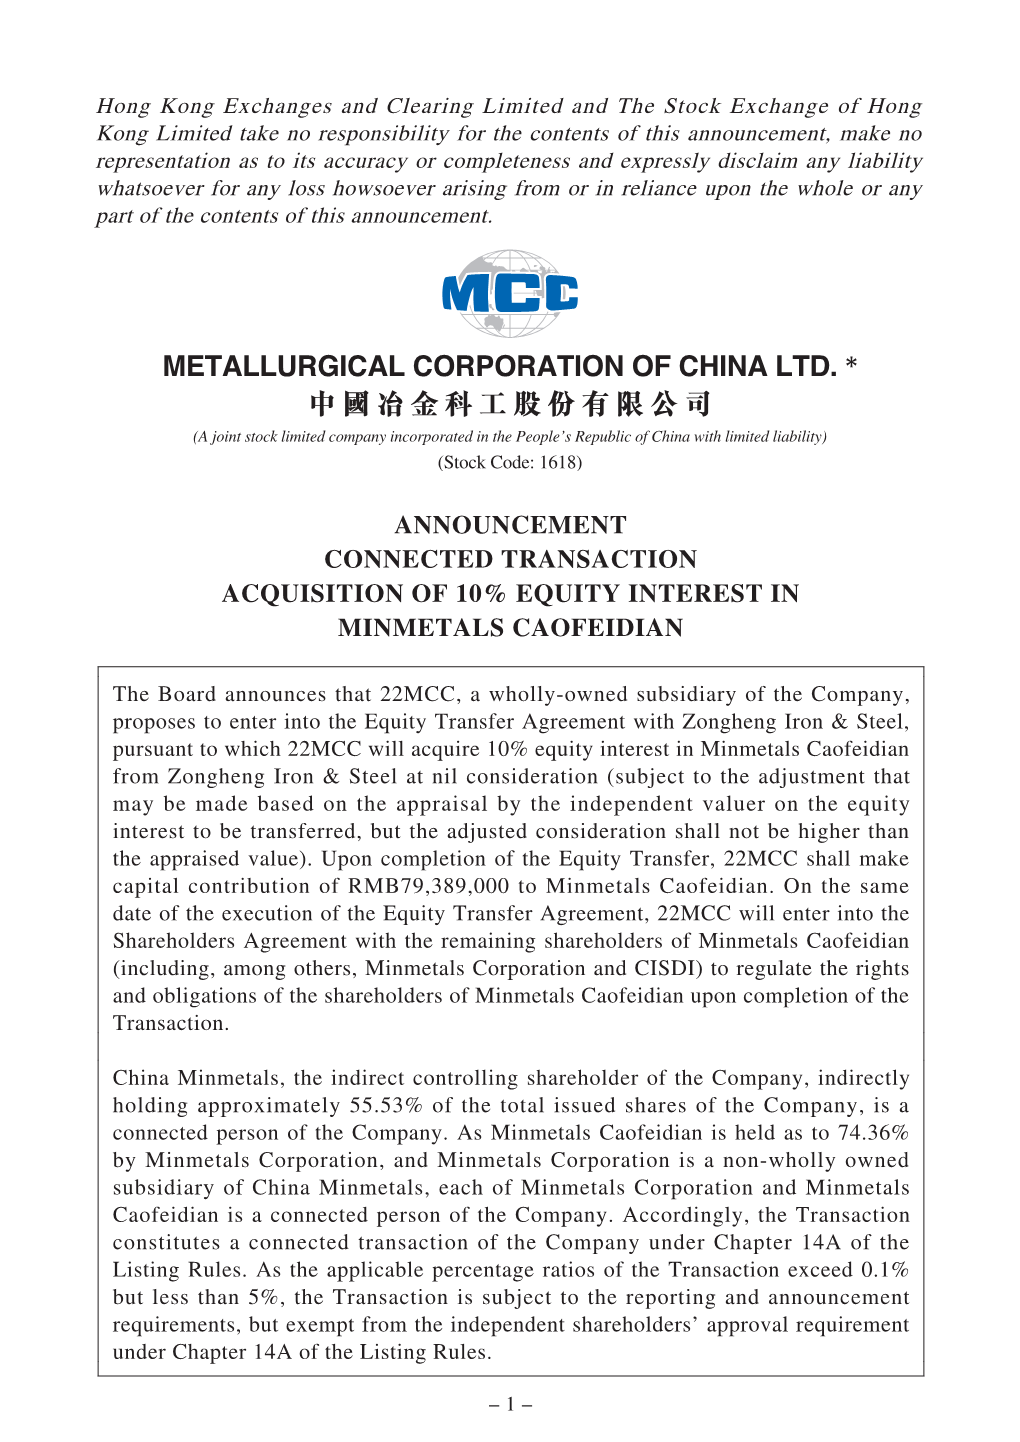 Announcement Connected Transaction Acquisition of 10% Equity Interest in Minmetals Caofeidian